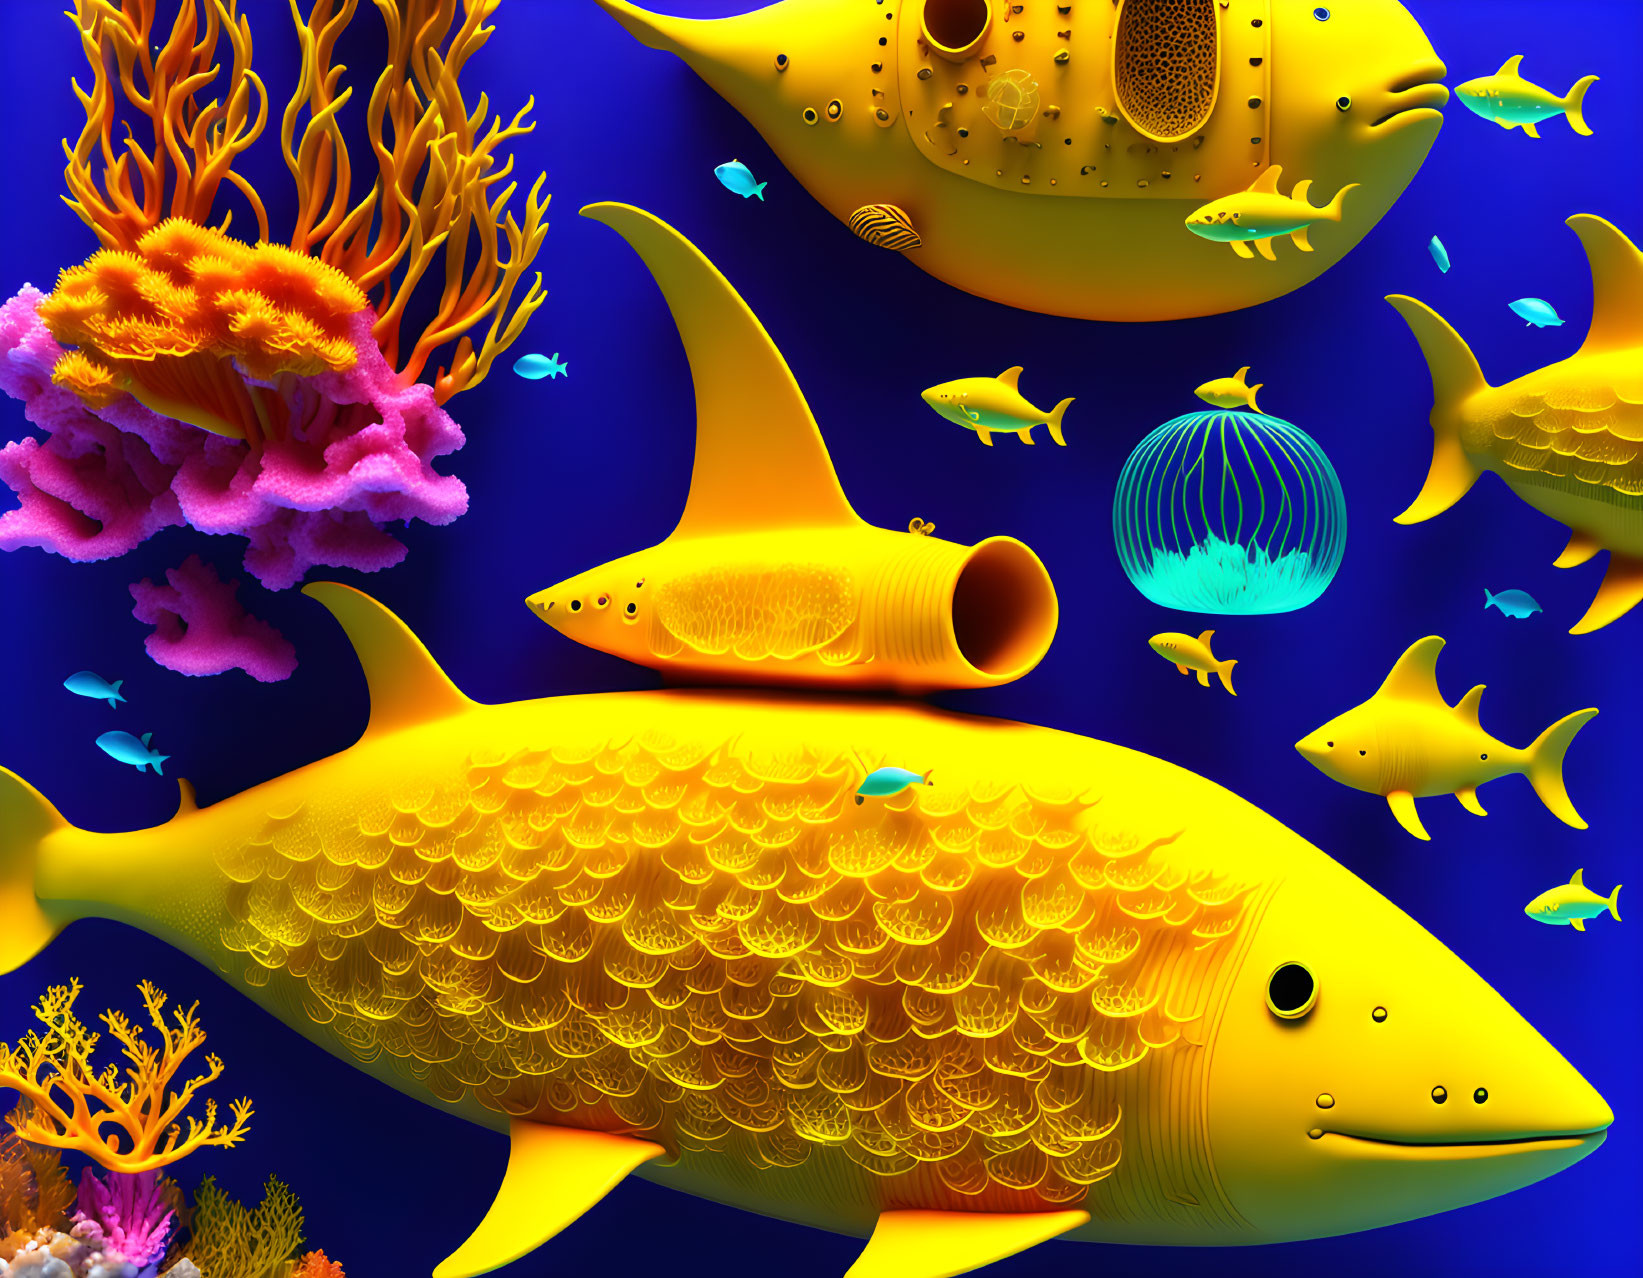 Colorful underwater scene with yellow fish, coral structures, and marine creatures